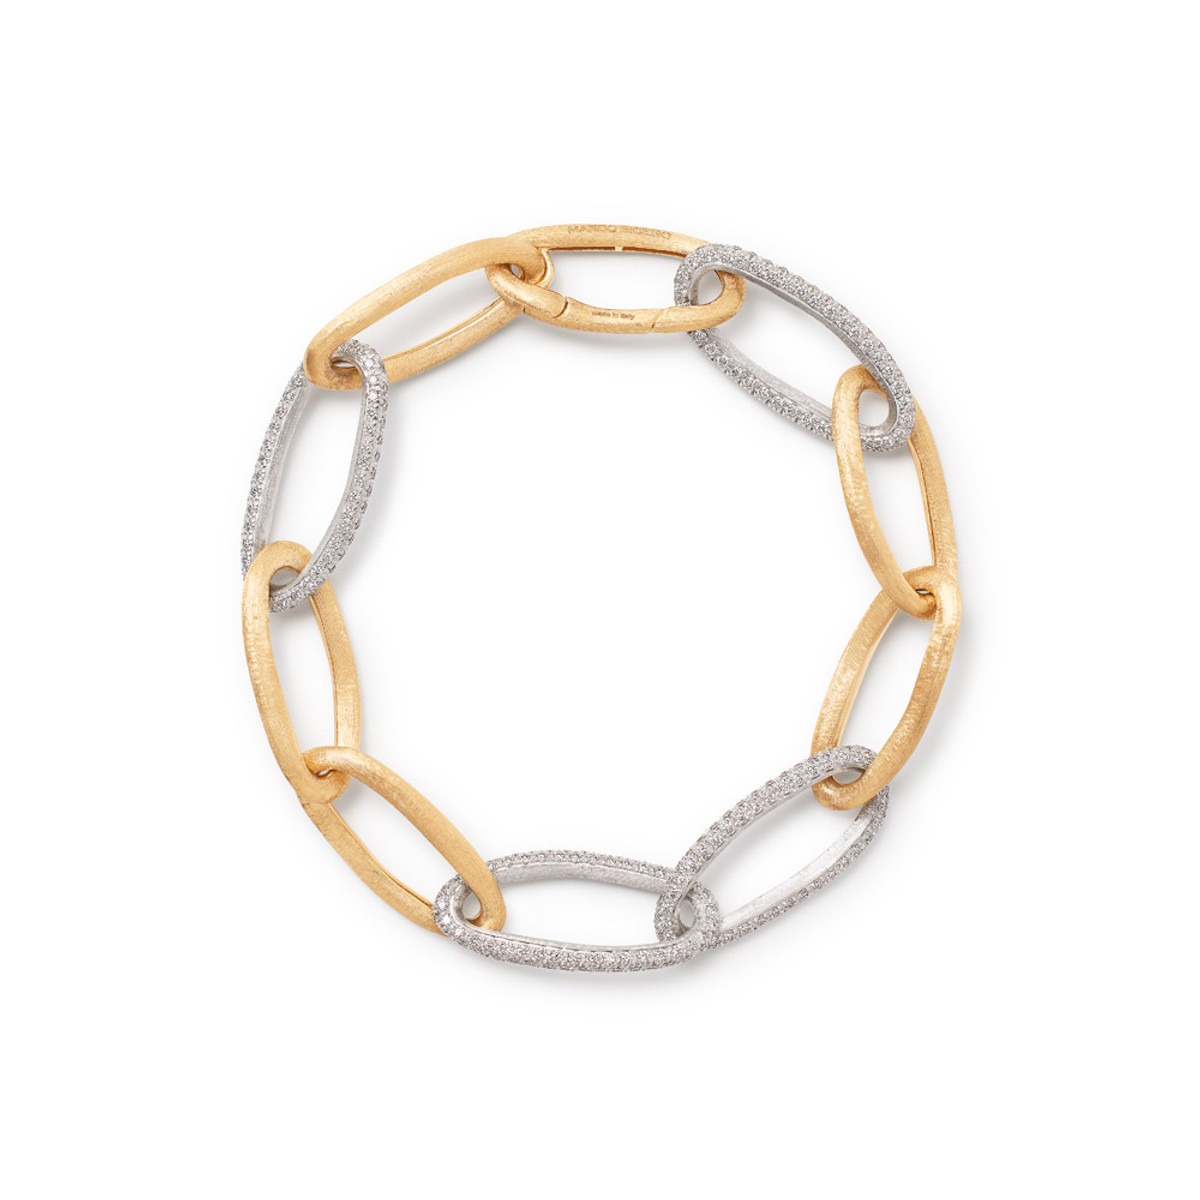 Marco Bicego Alta Collection 18K Yellow Gold Diamond Link Bracelet-54237 Product Image